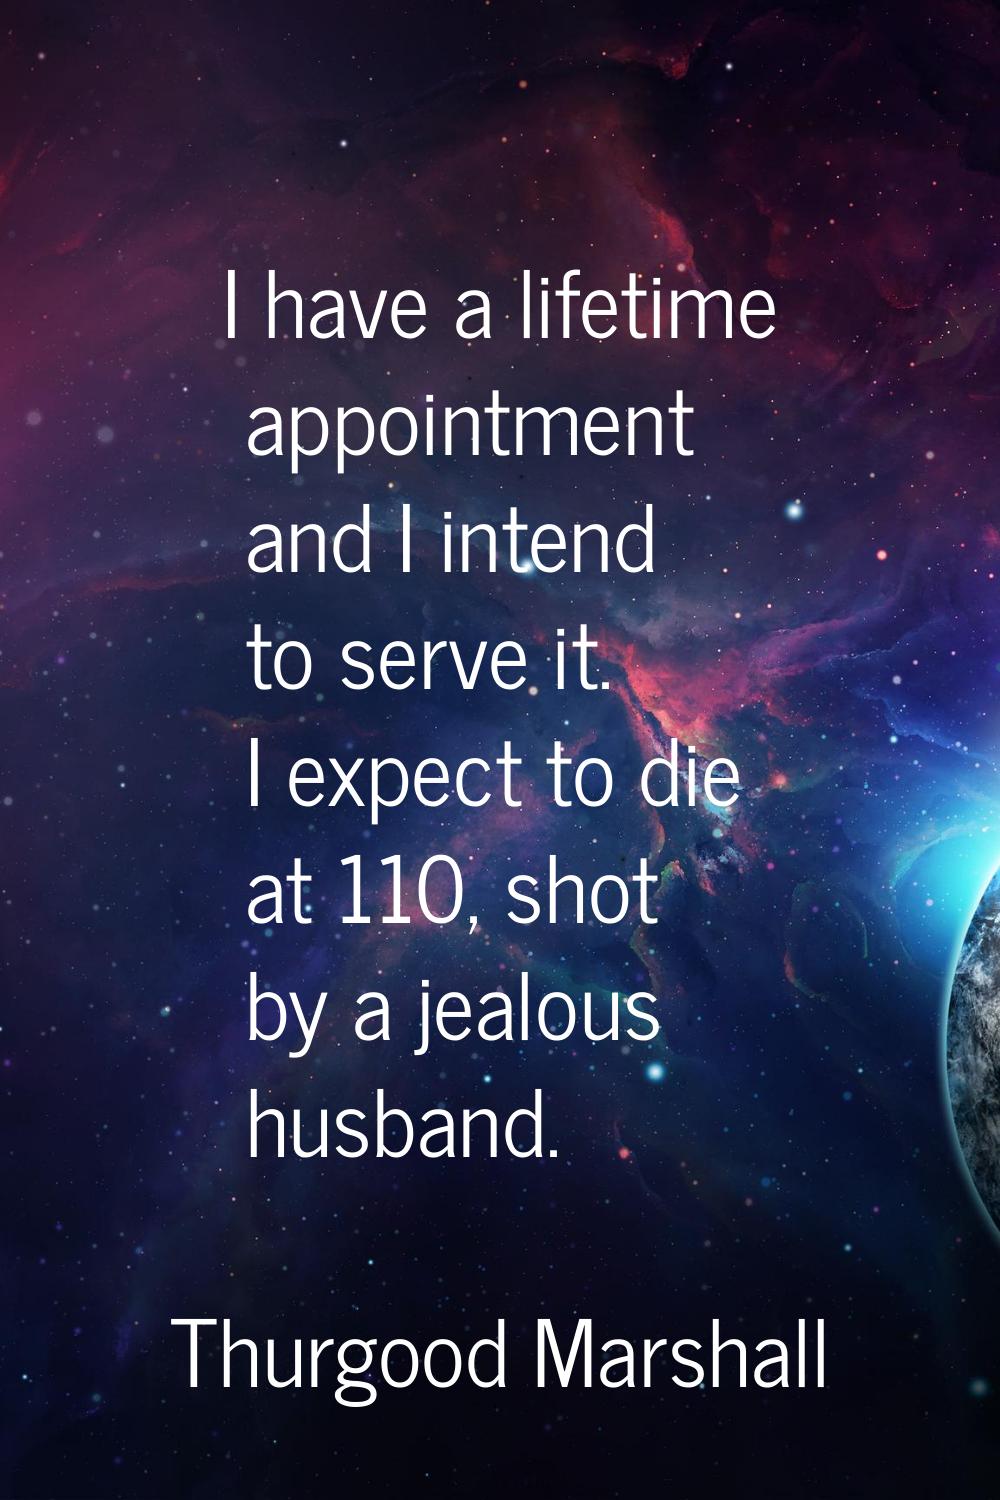 I have a lifetime appointment and I intend to serve it. I expect to die at 110, shot by a jealous h